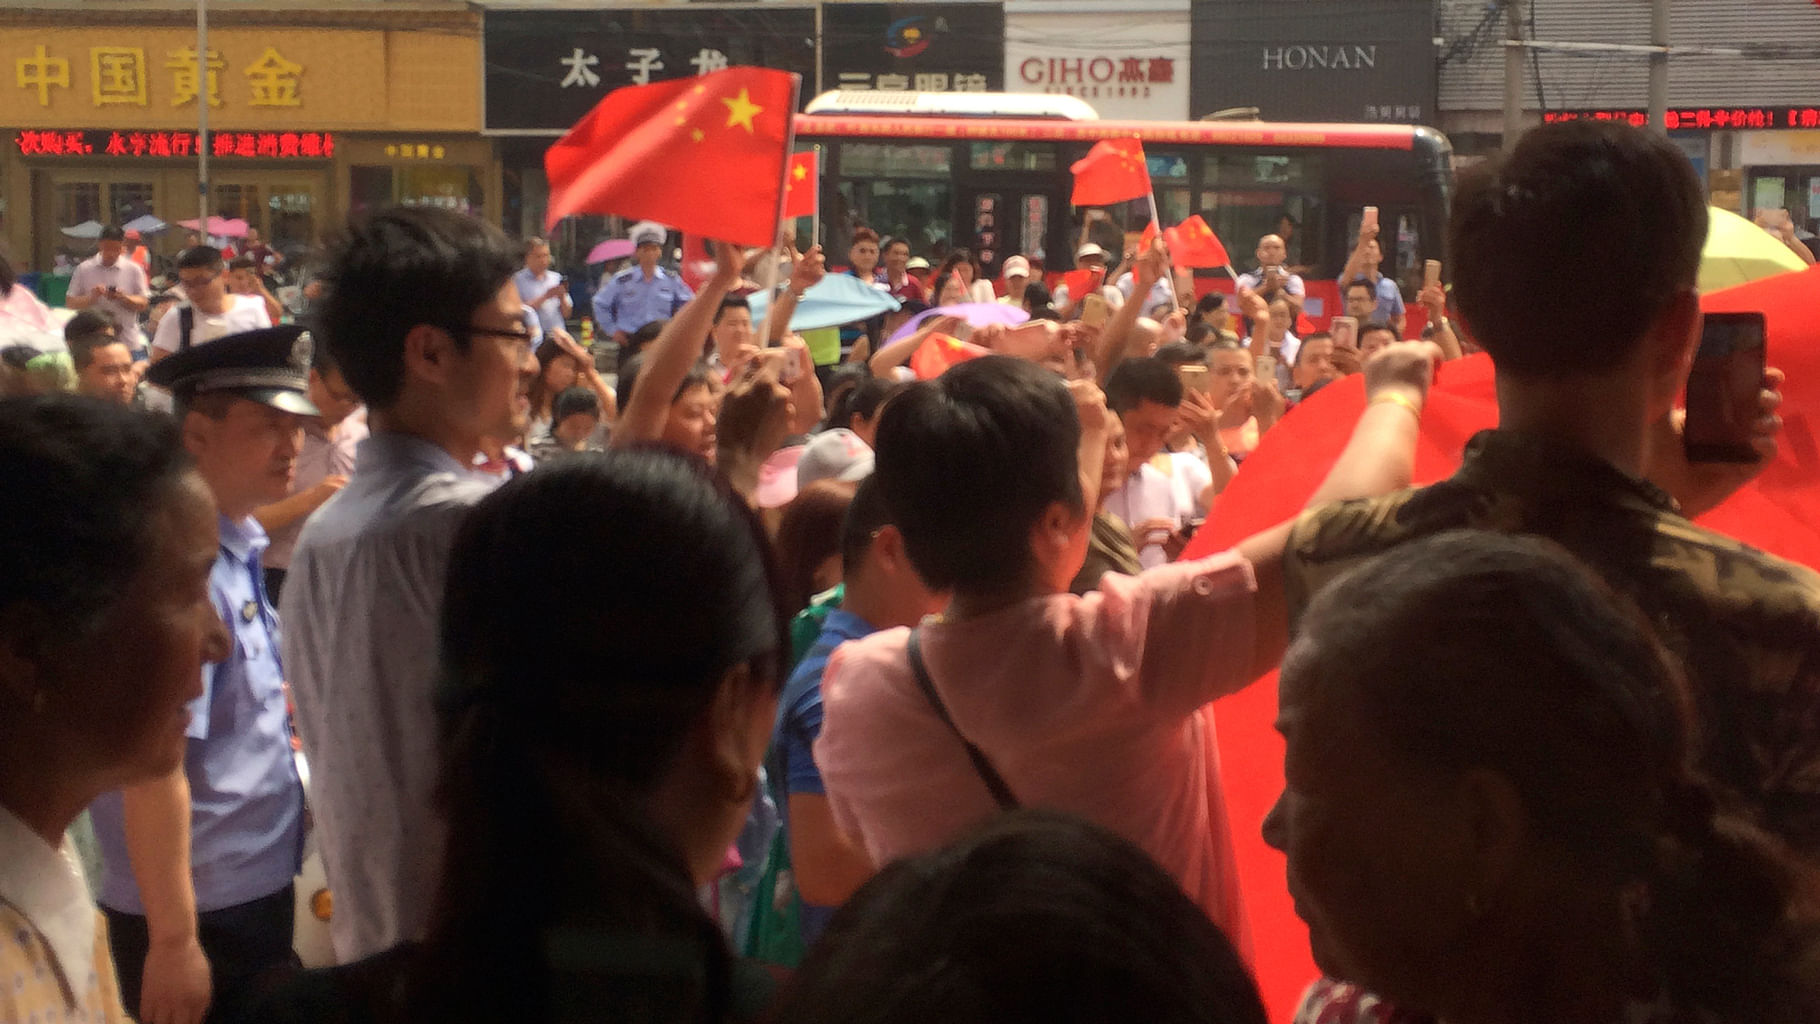  Chinese people carrying national flags hold a protest outside a KFC restaurant. (Photo: AP)